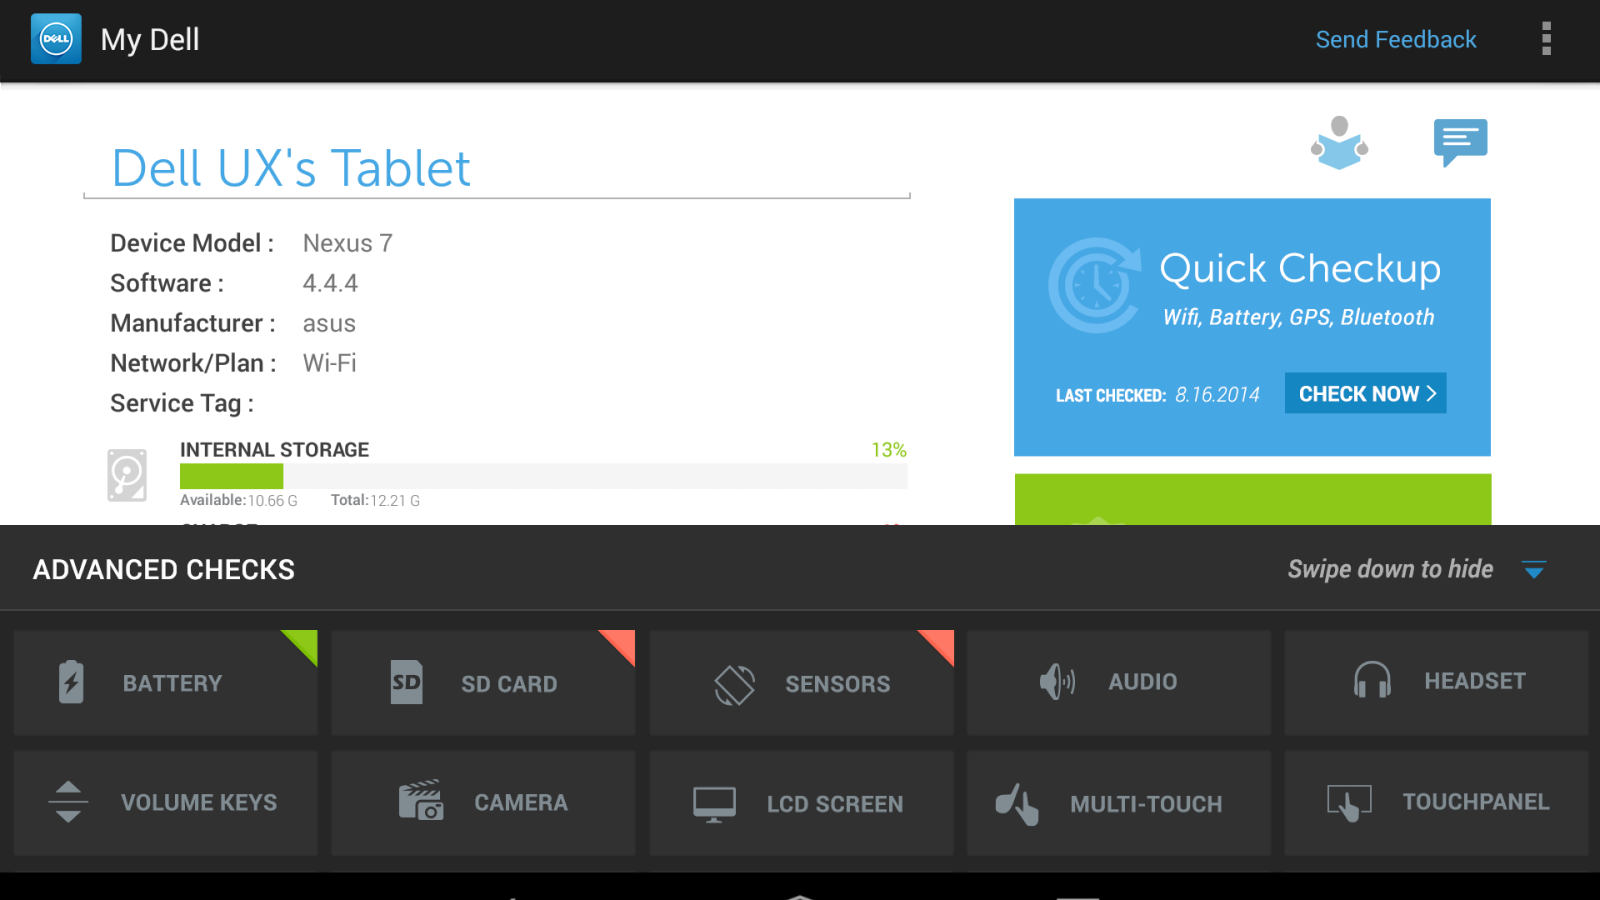 Shown is a tablet performance checkup app